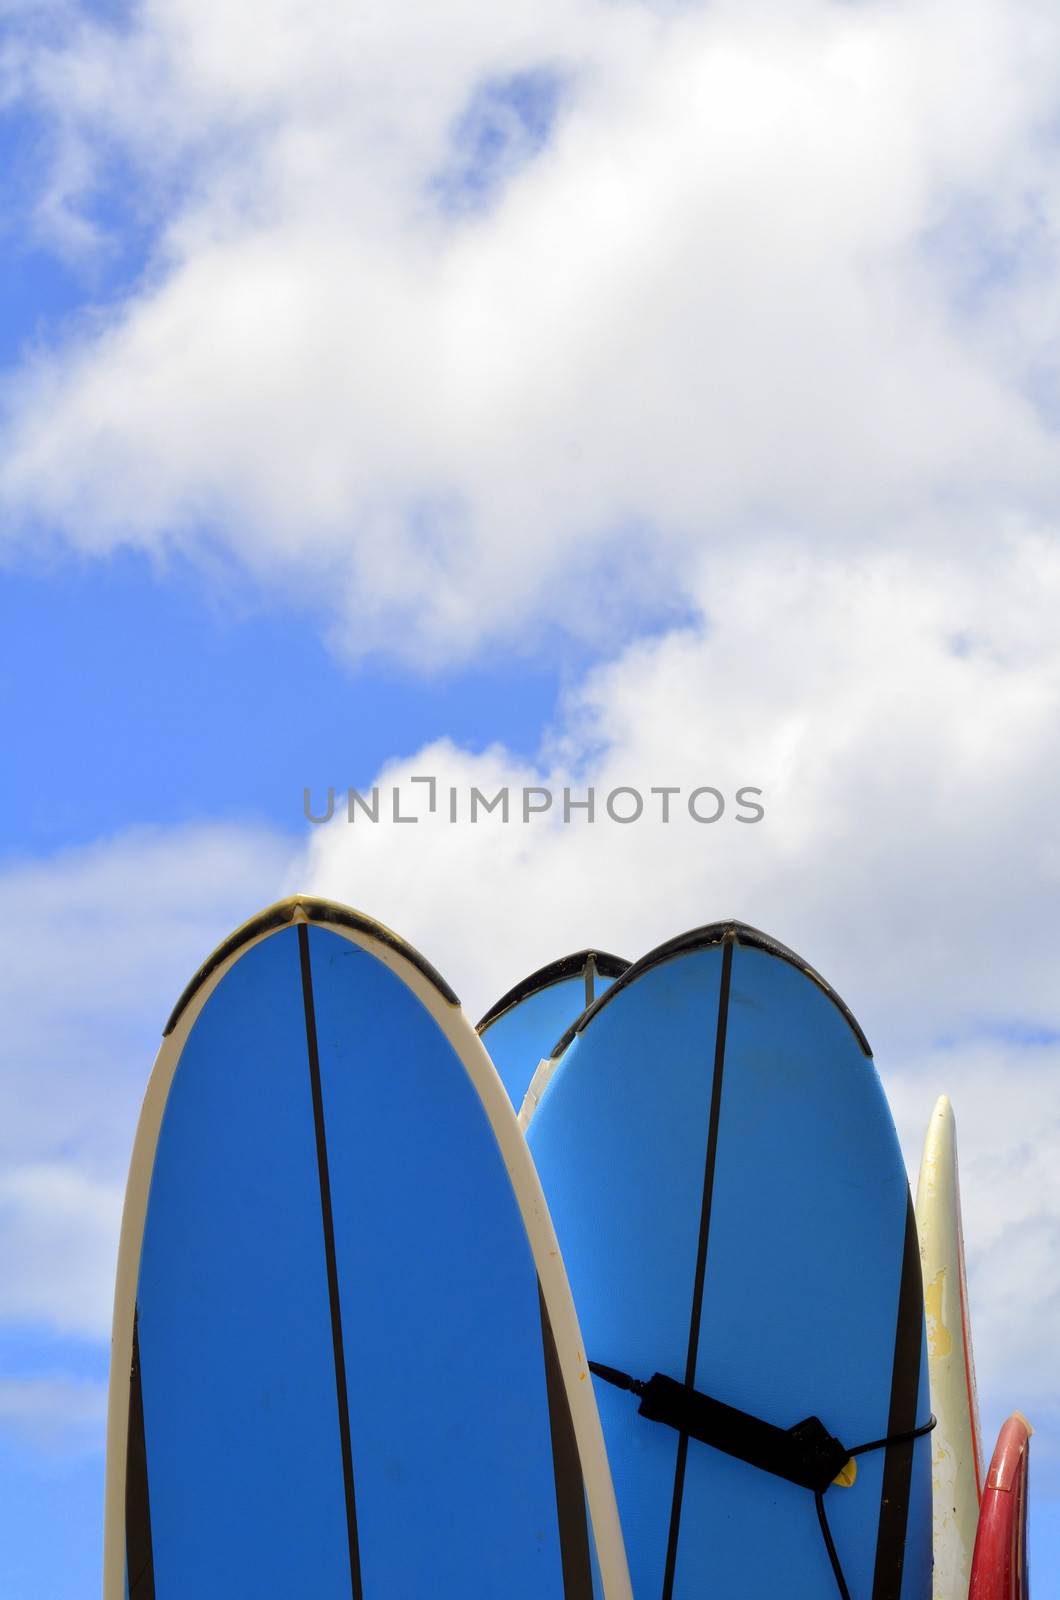 Vacation And Sport Image Of Surfboards With Copy Space